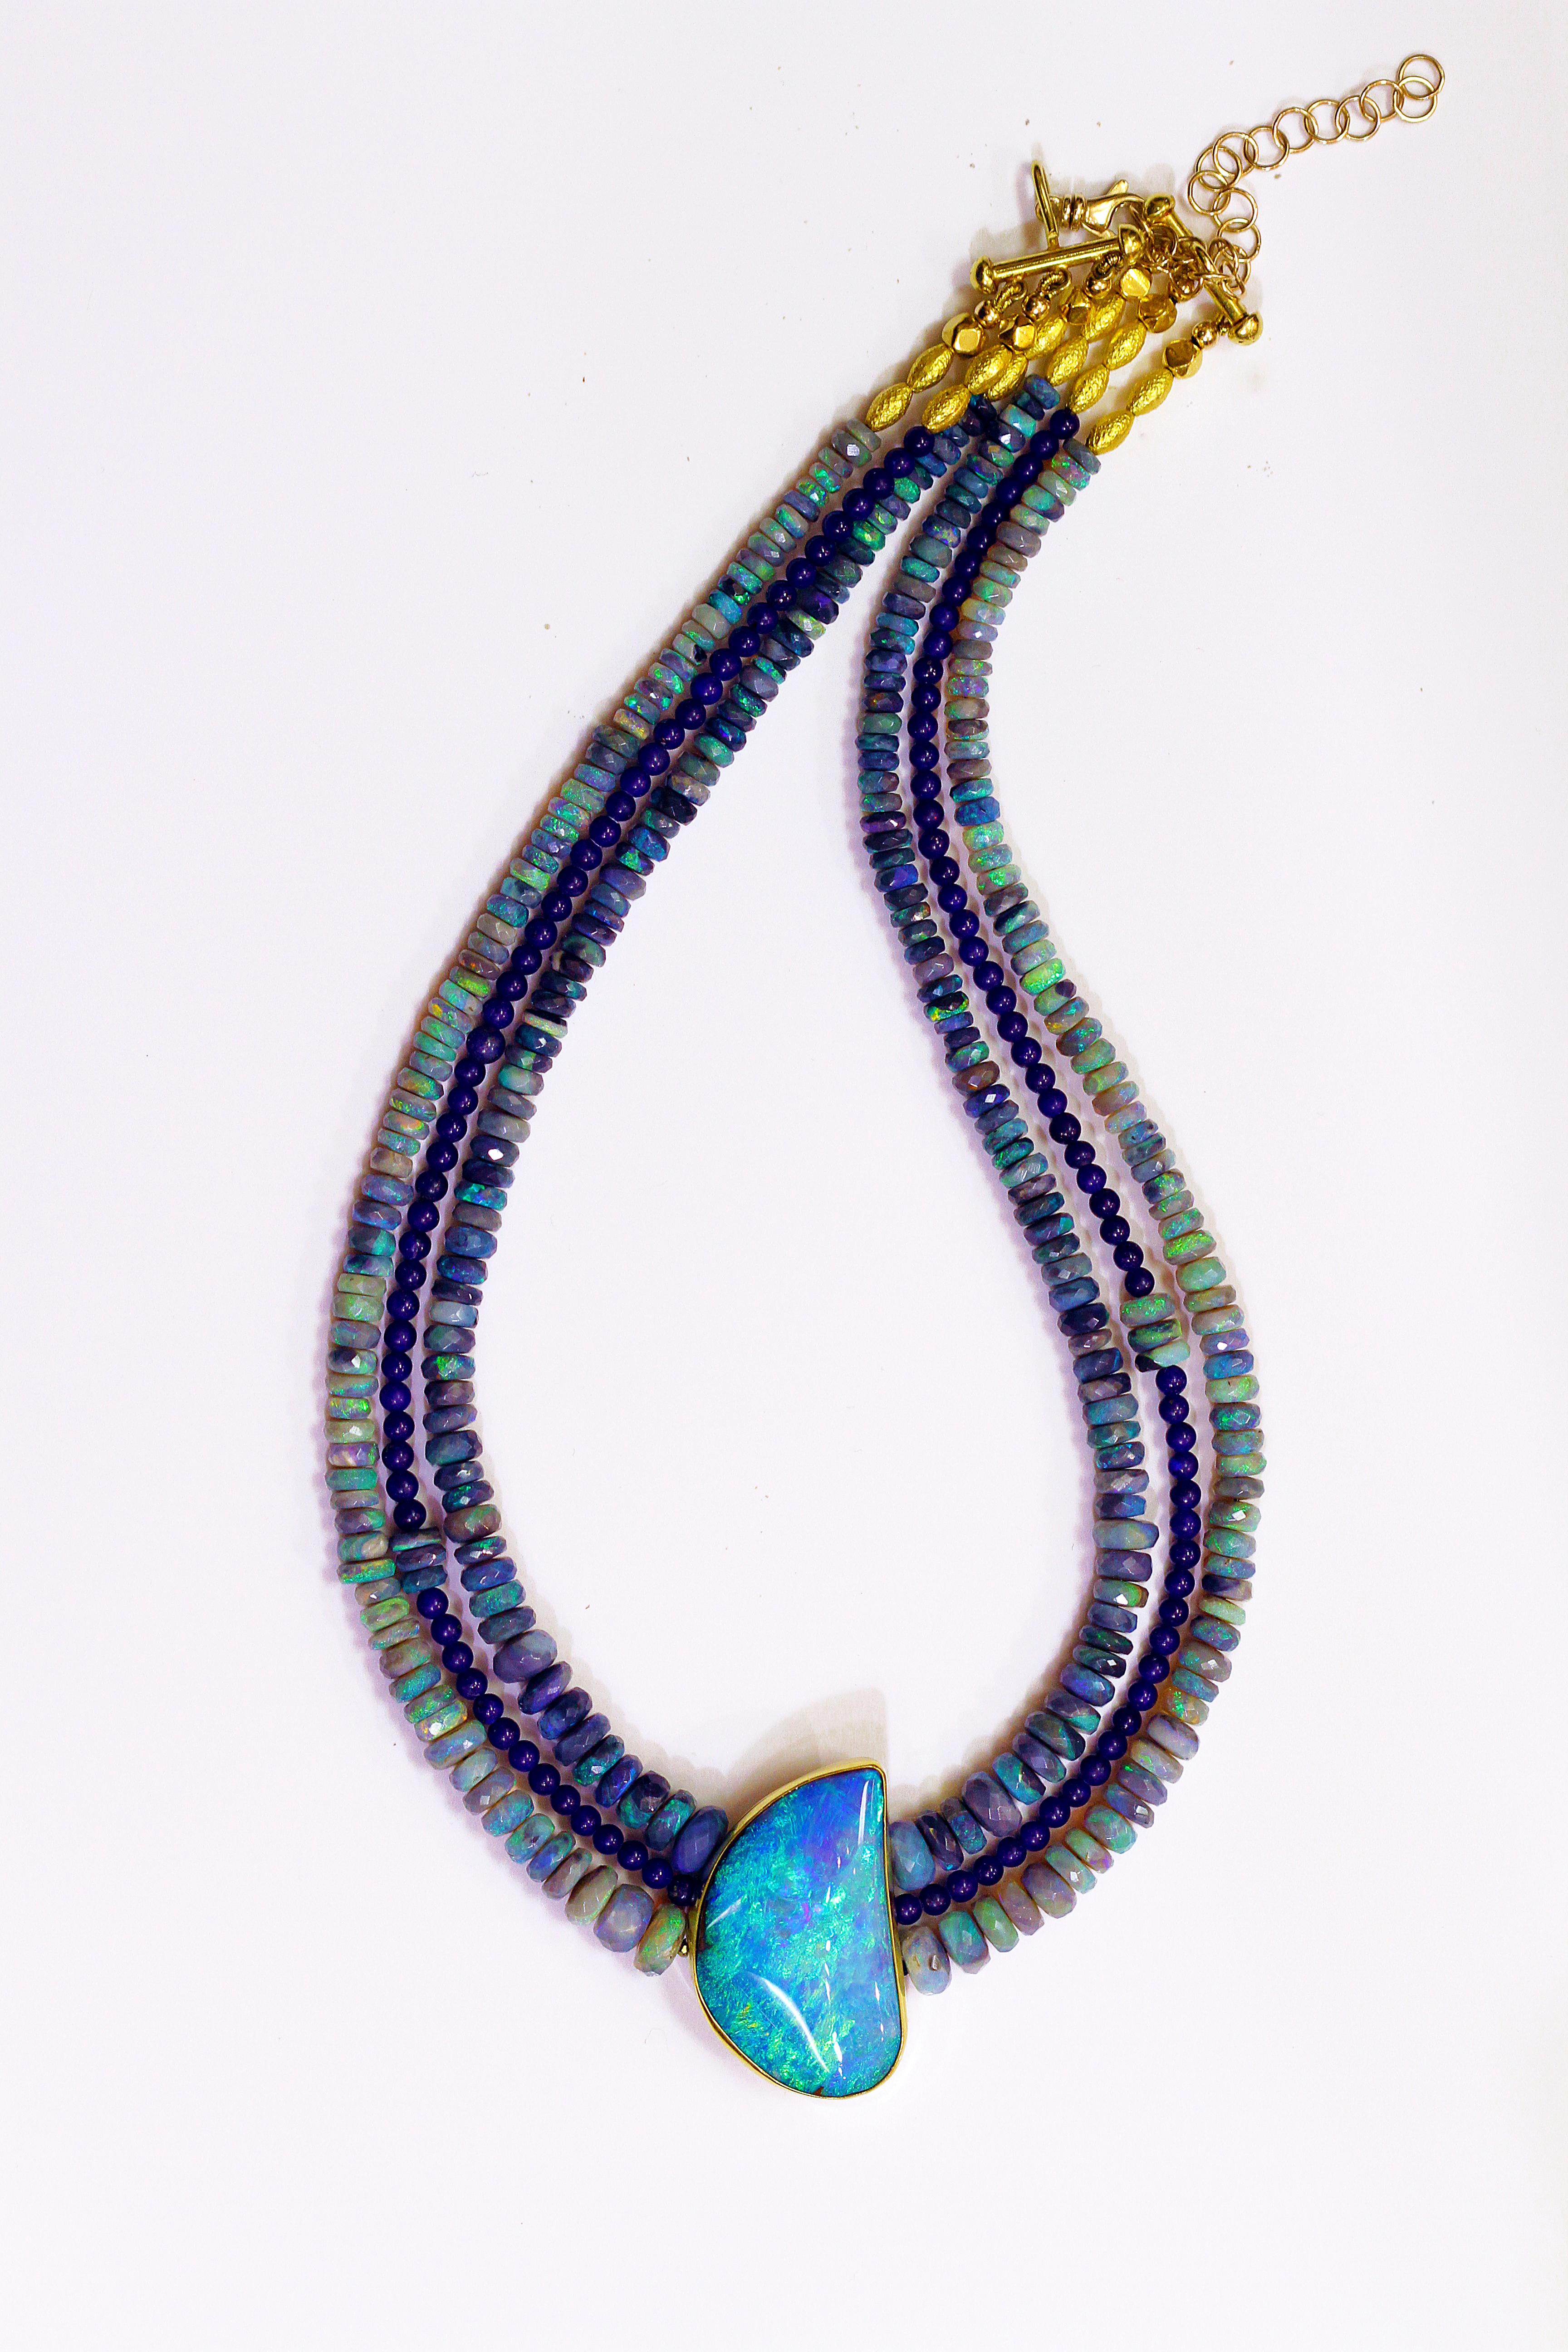 Black opal & boulder opal necklace with 18k gold spacers.  The color in the boulder opal has exquisite blue and green shades and sit's very well with these luscious black opal beads and lapis beads.  Truly a show stopper!  Black opal comes from New